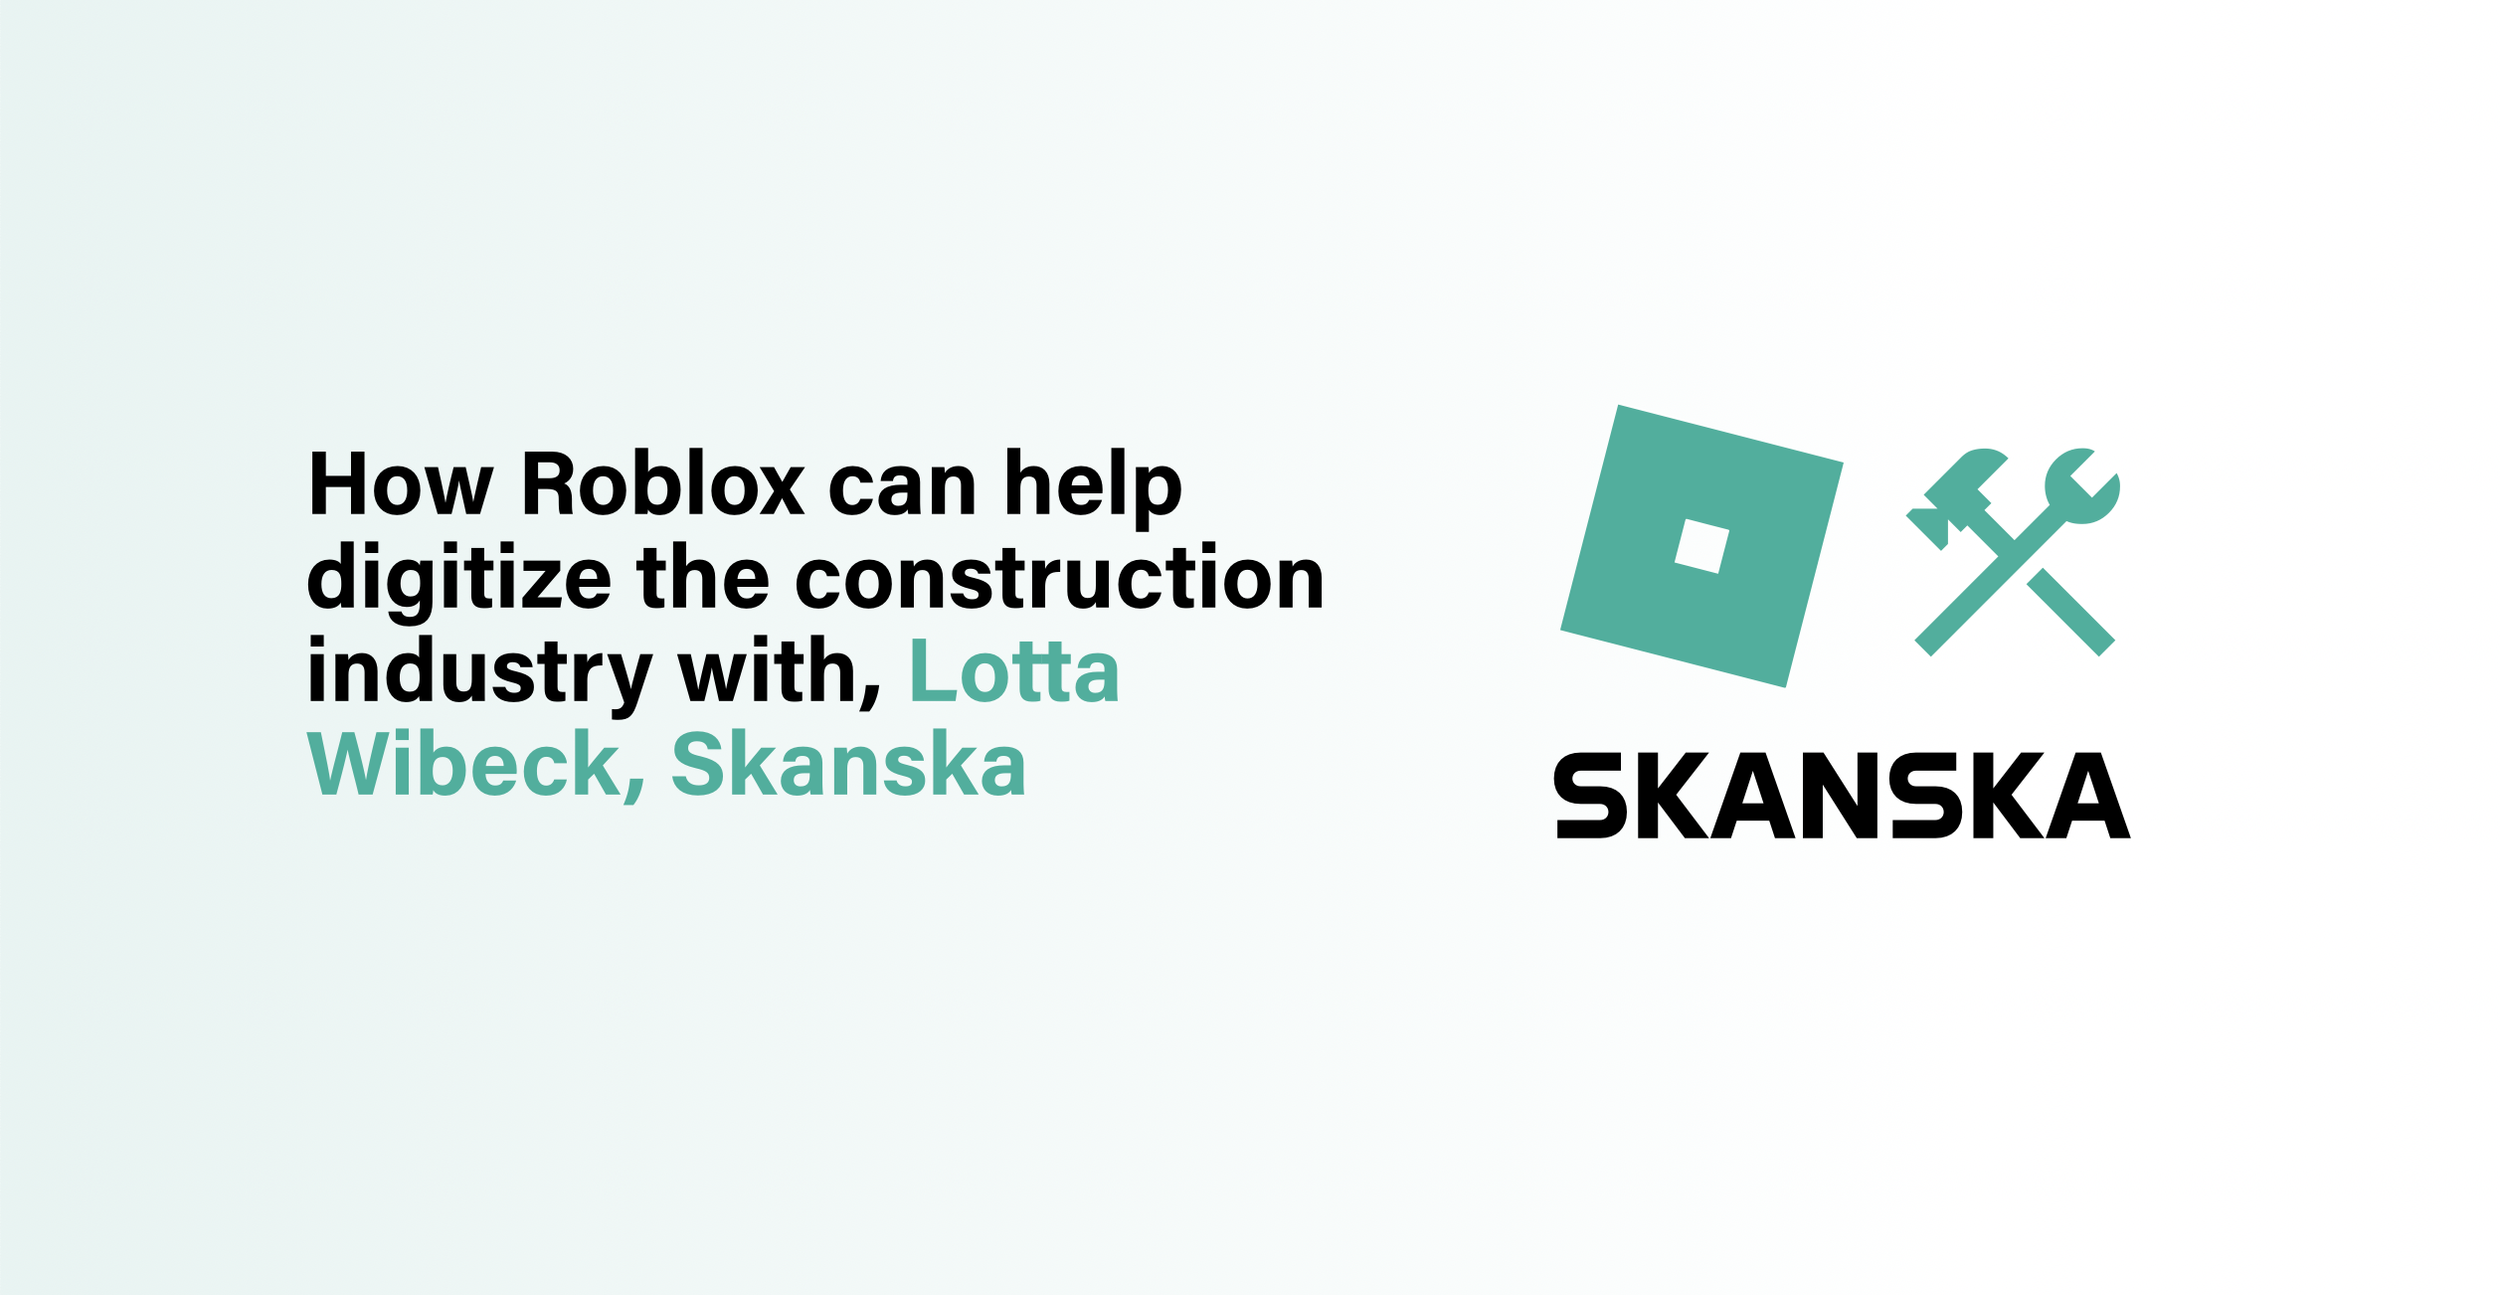 How Roblox can help digitize the construction industry with Lotta Wibeck, Skanska